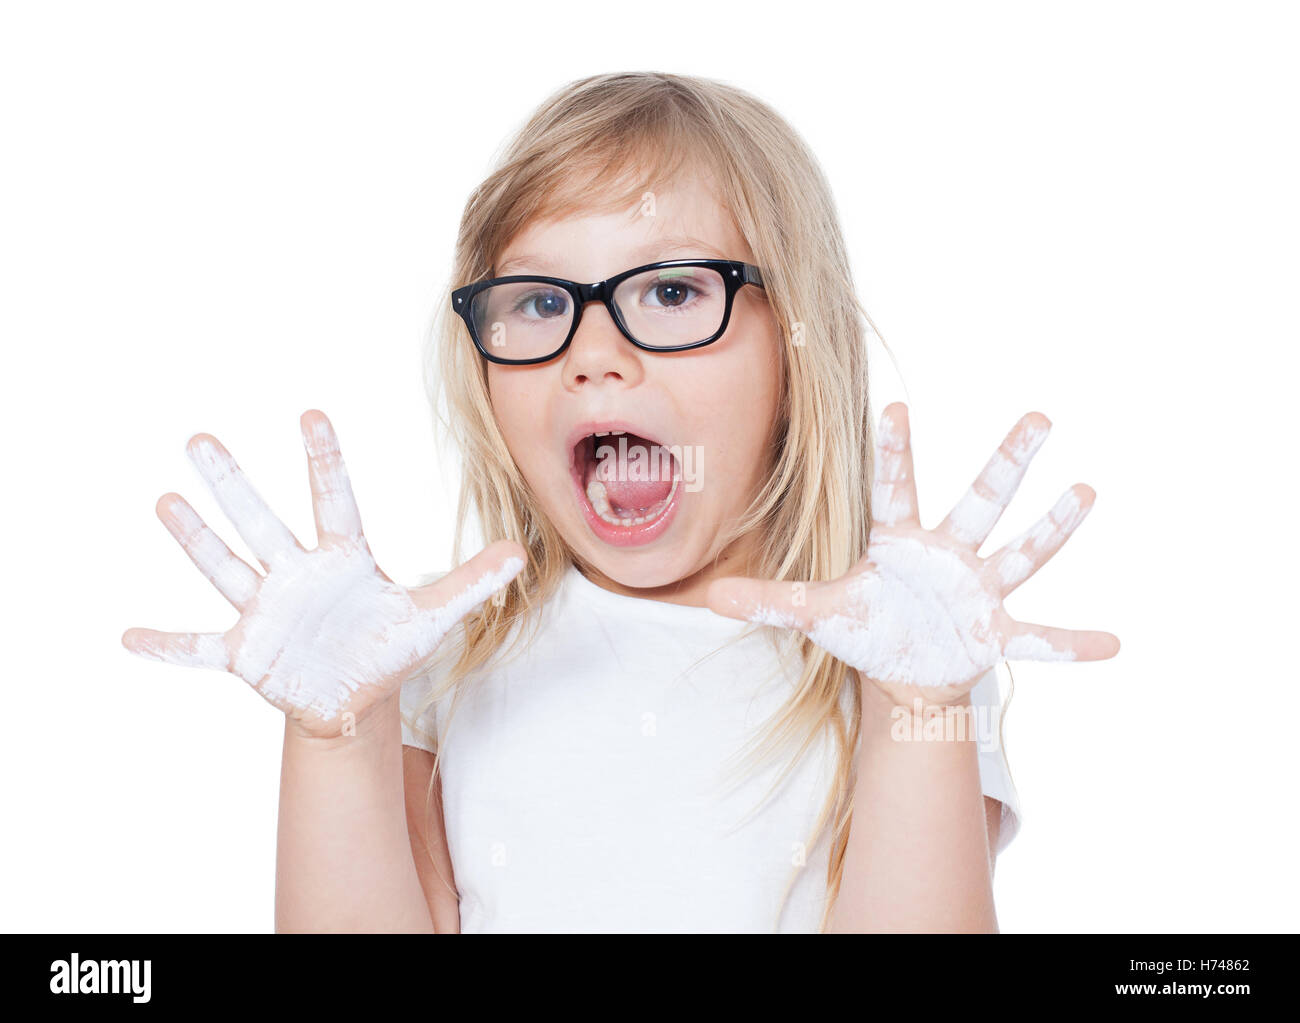 Child with painted hands on a white background Stock Photo